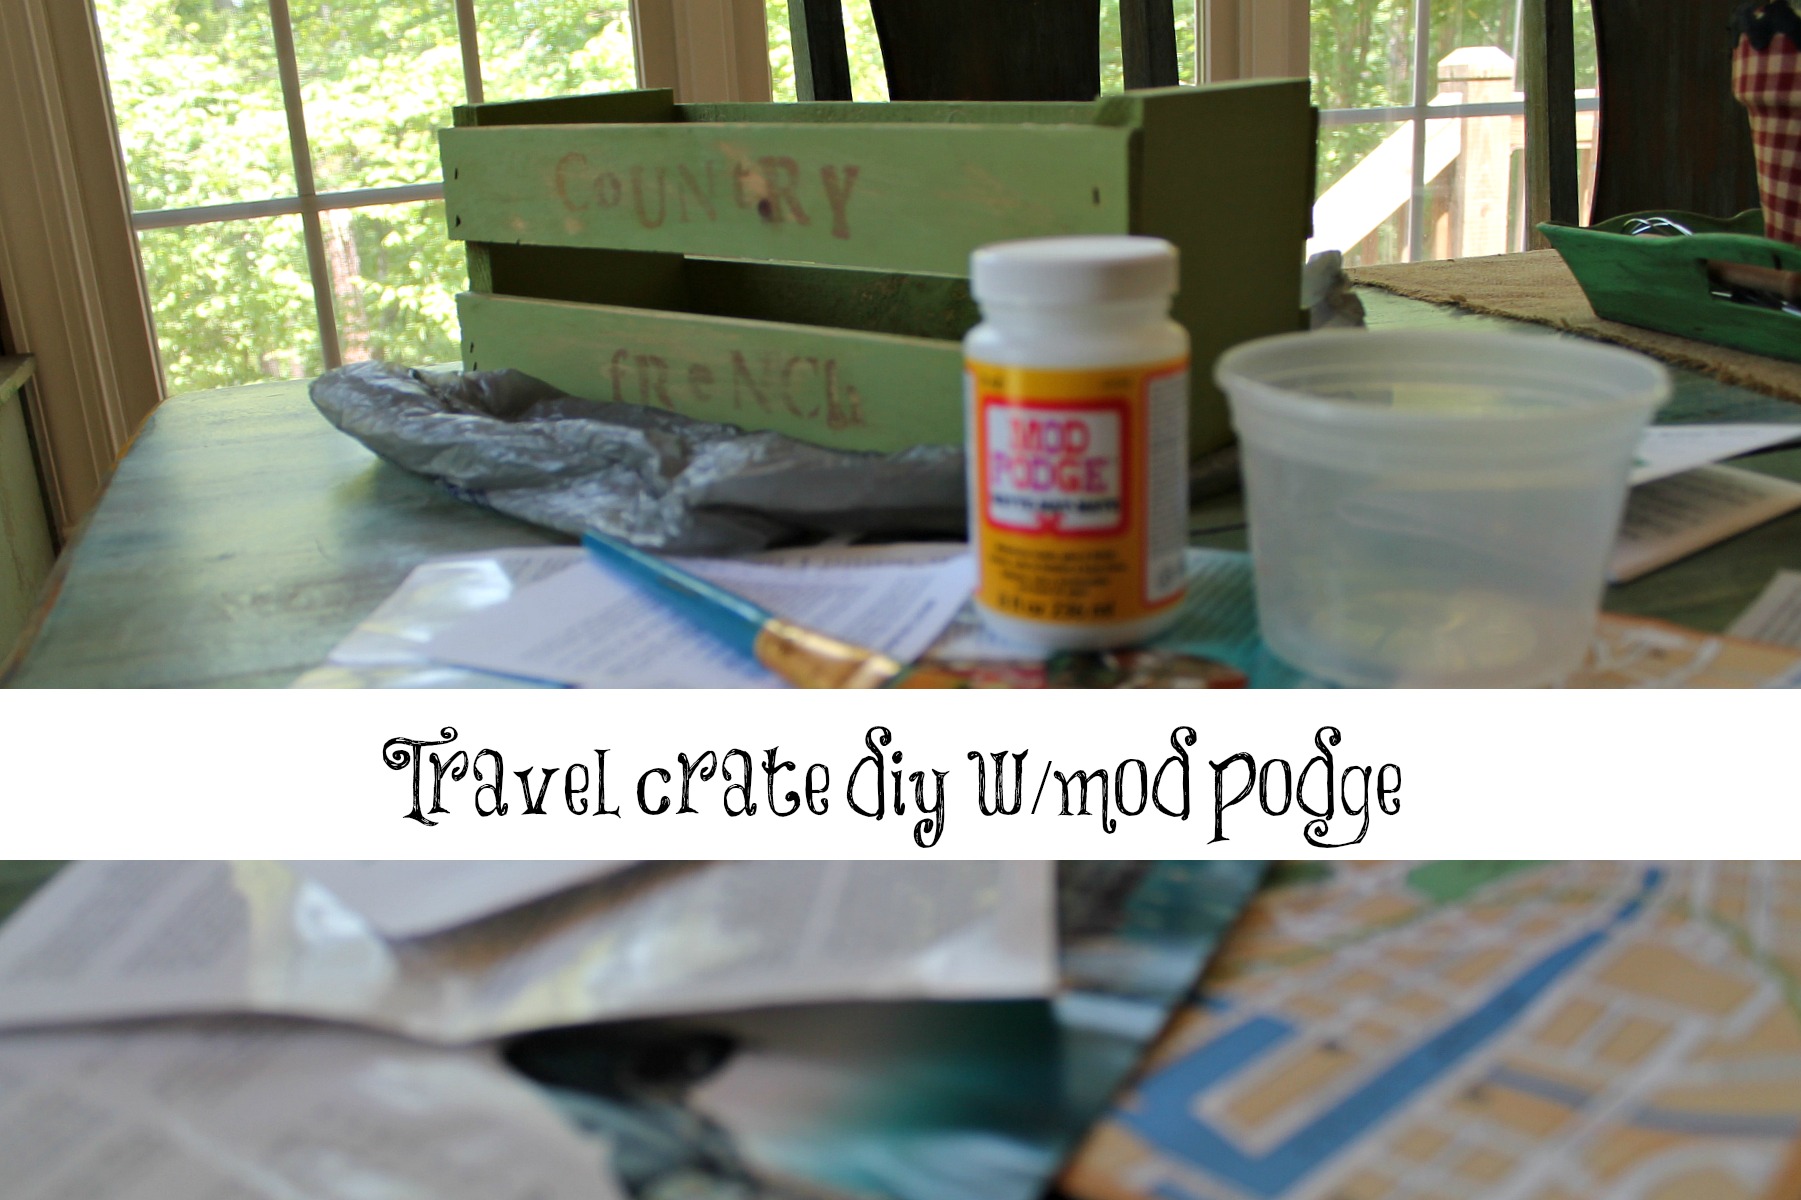 Travel crate with mod podge